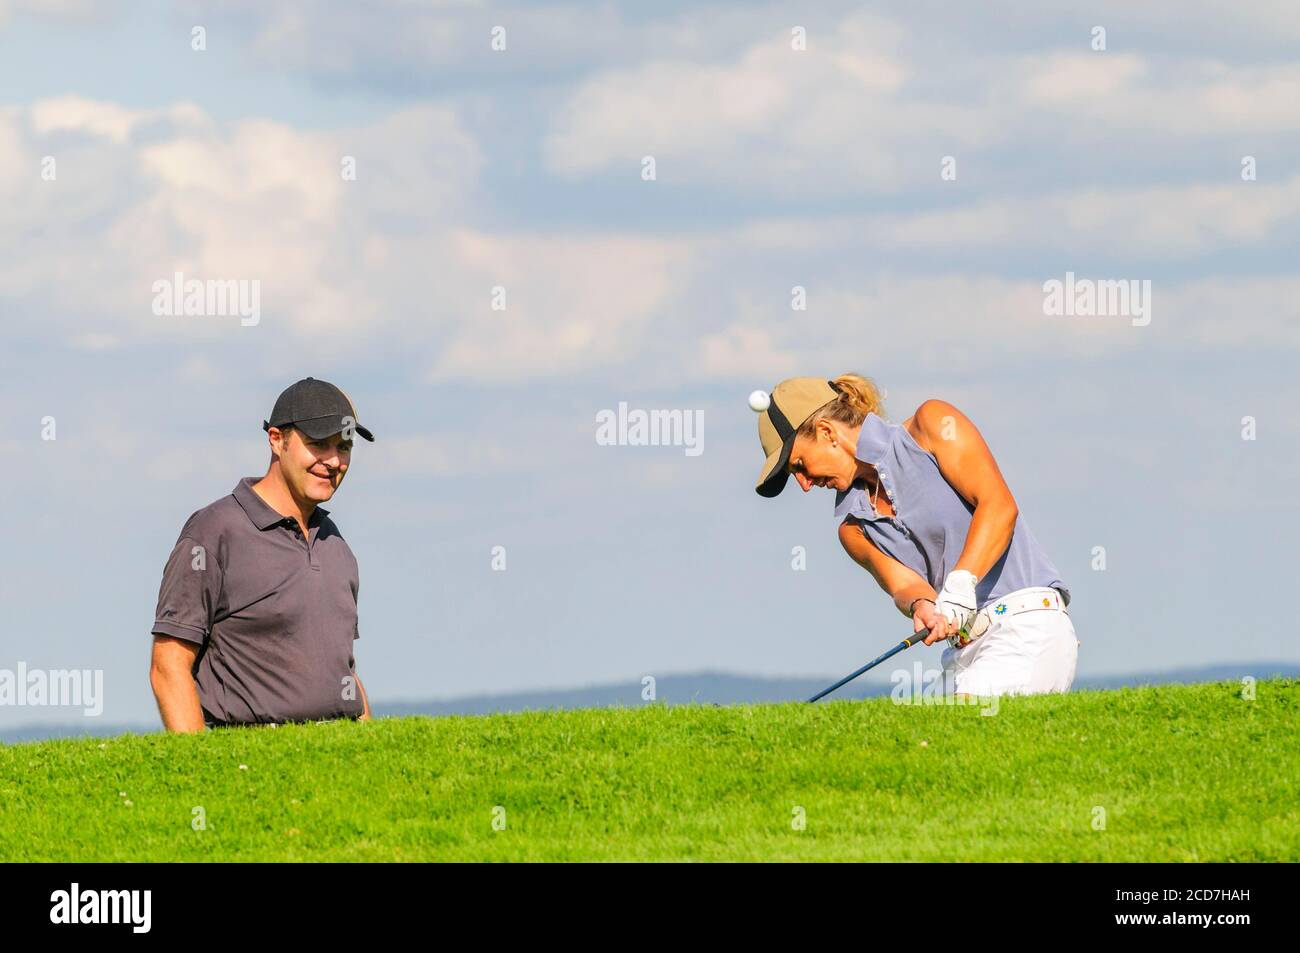 Man and woman playing golf on a beautiful parkland course at a sunny day in summertime Stock Photo